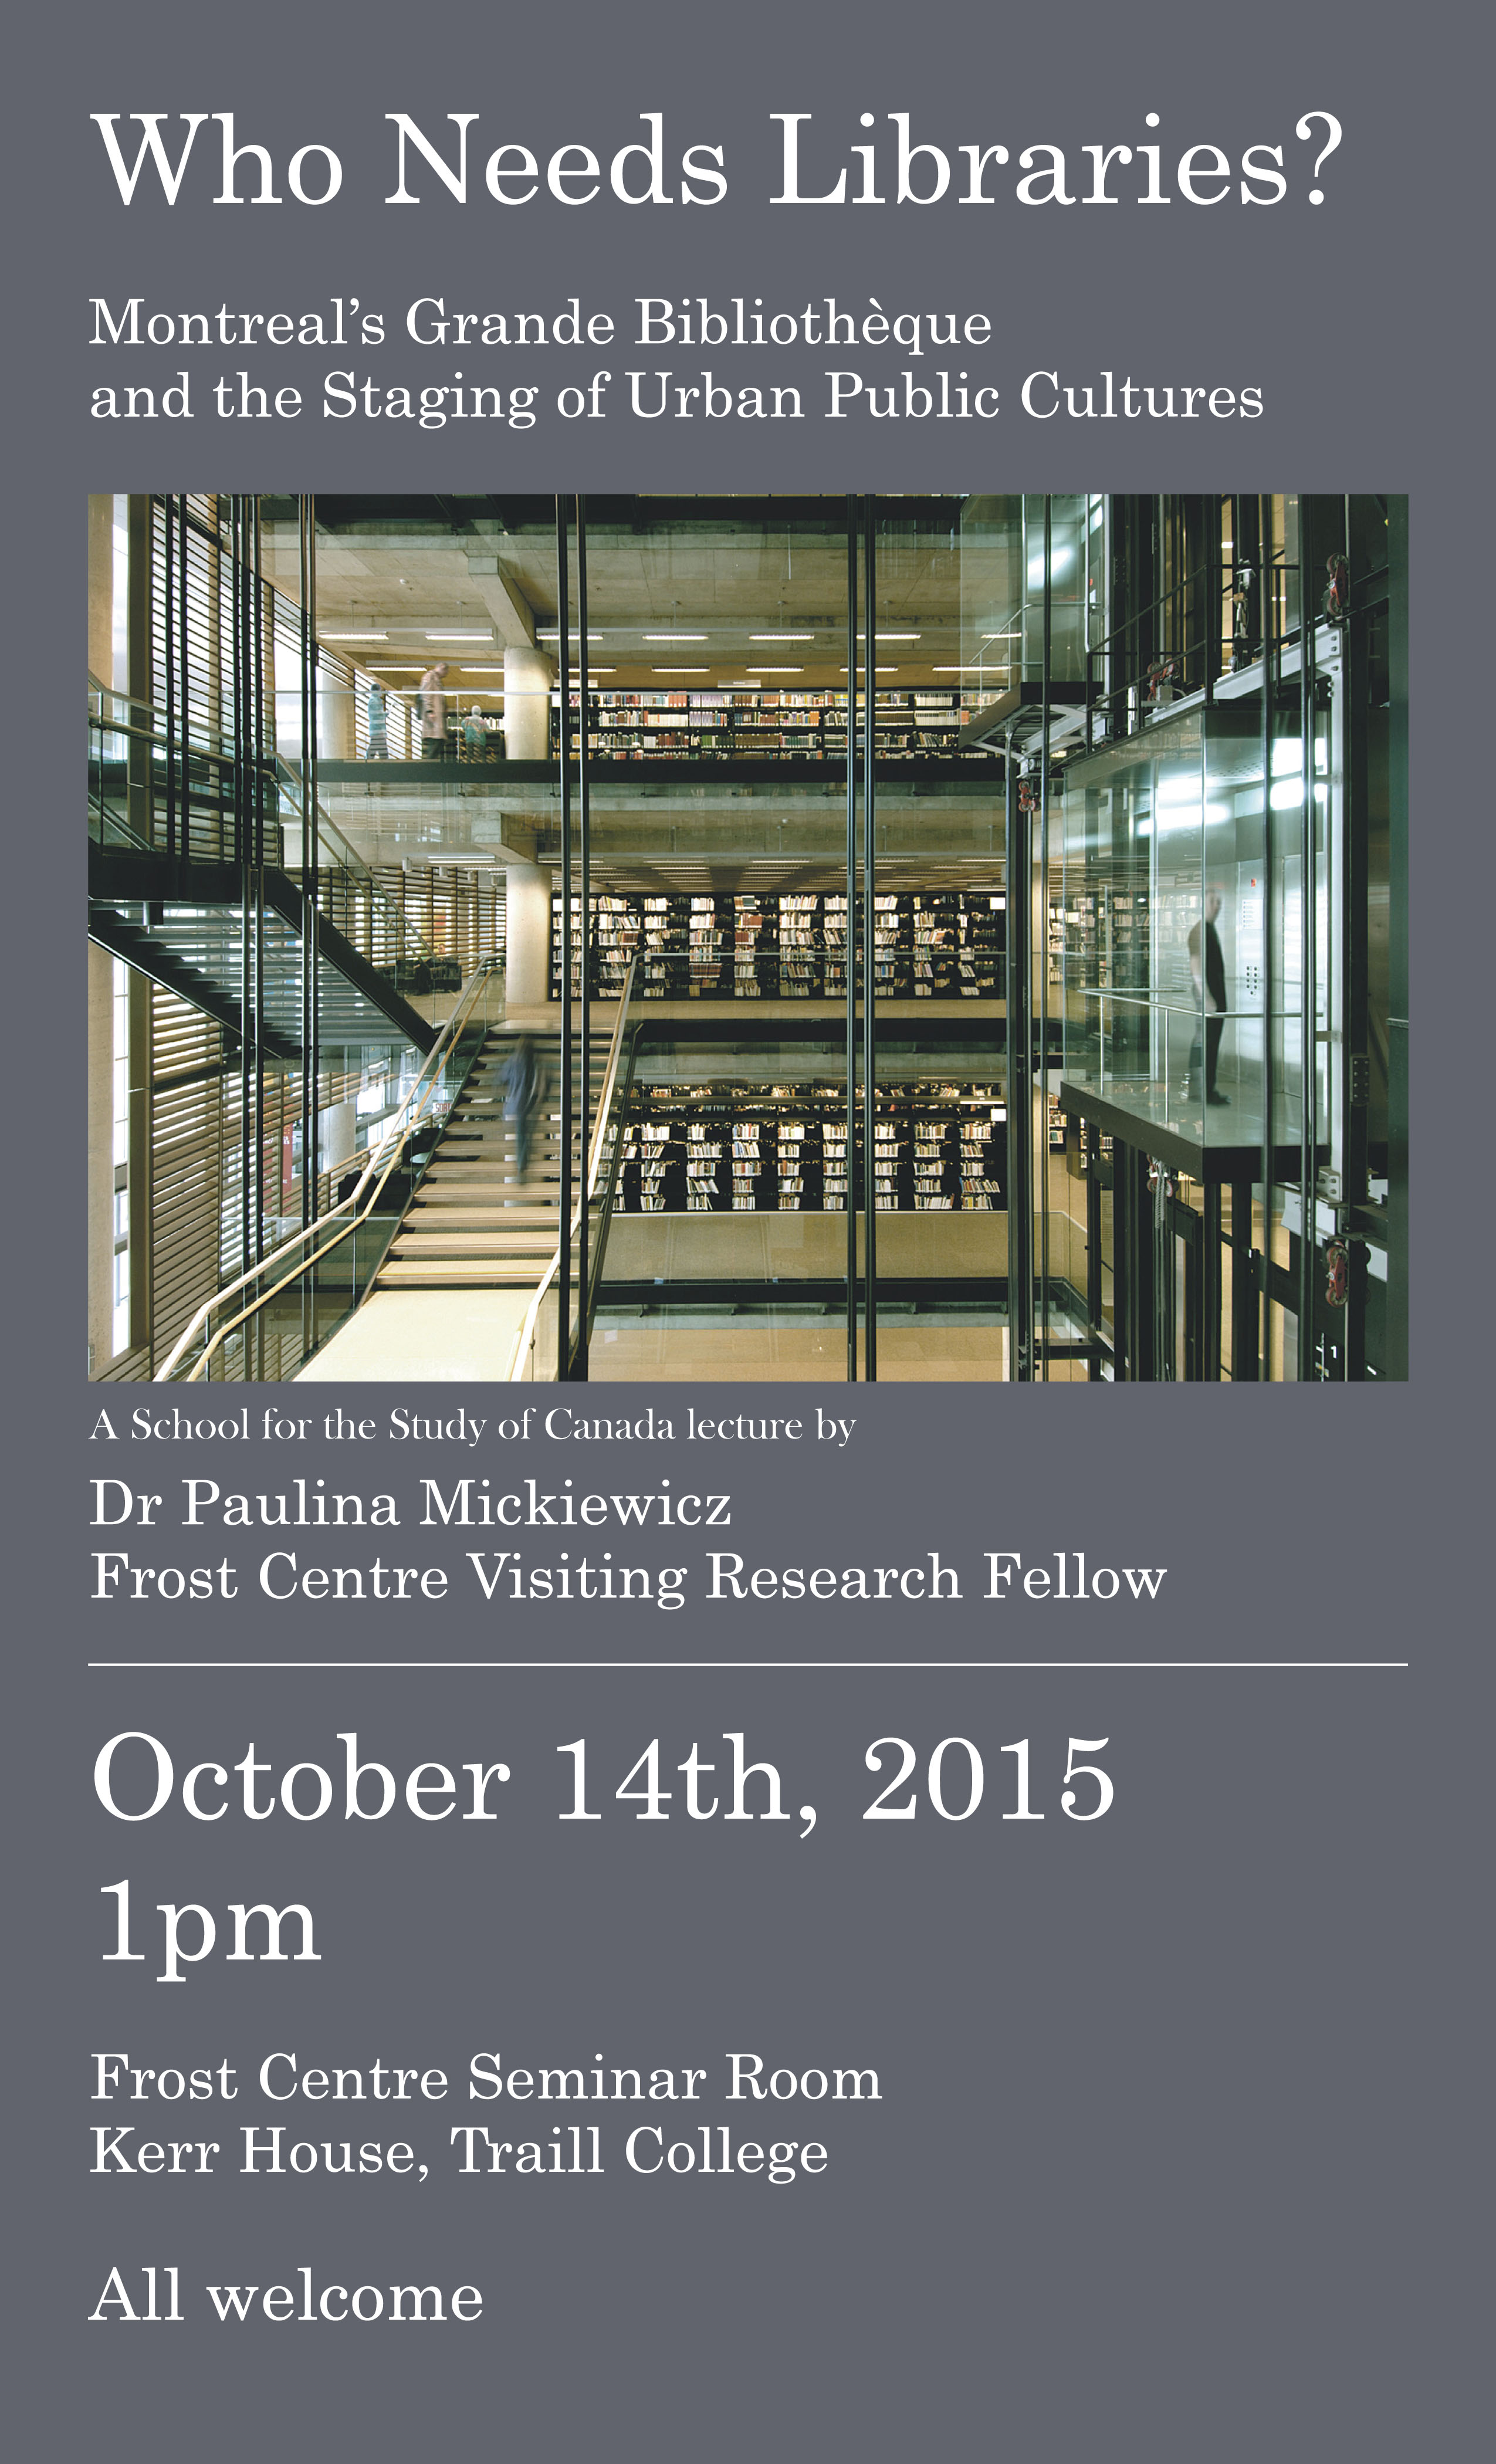 "Who Needs Libraries?" with Paulina Mickiewicz 14 October 2015